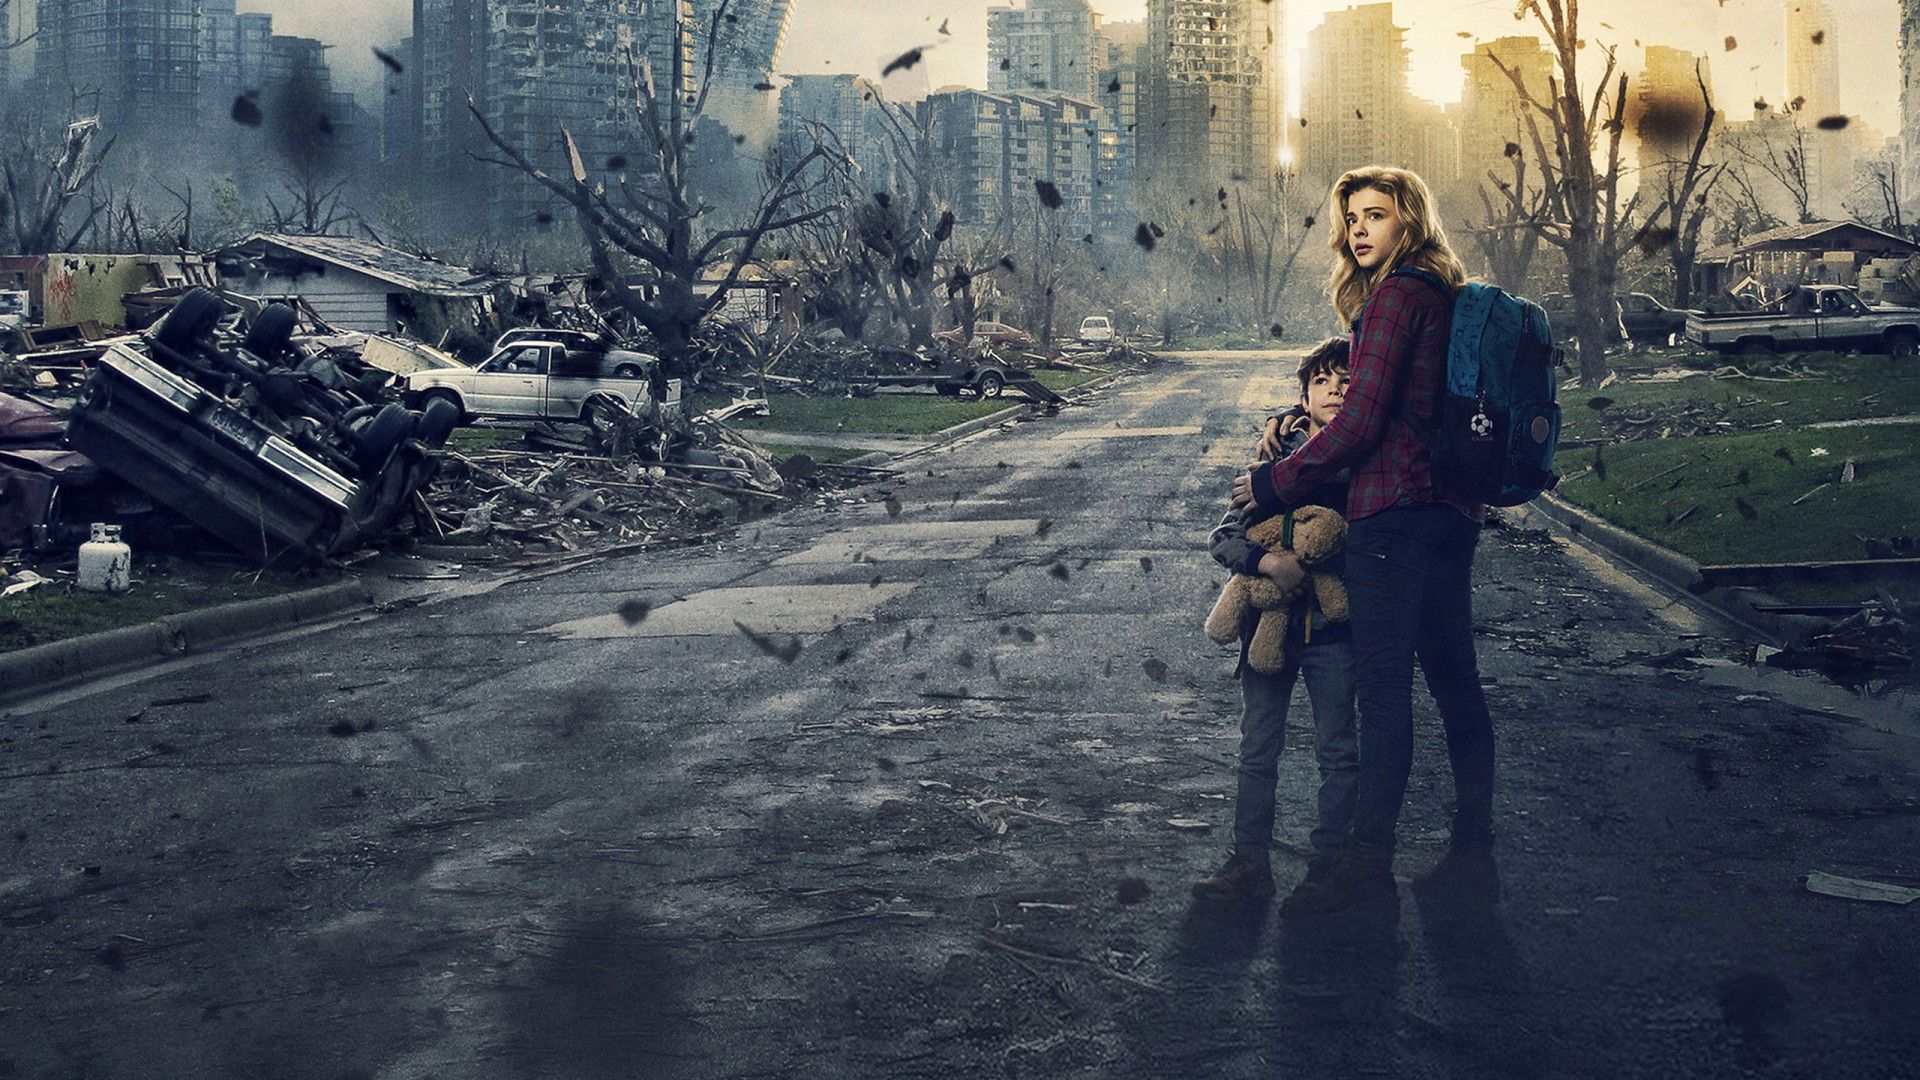 The 5th Wave Wallpaper 5th Wave (movie) Wallpaper